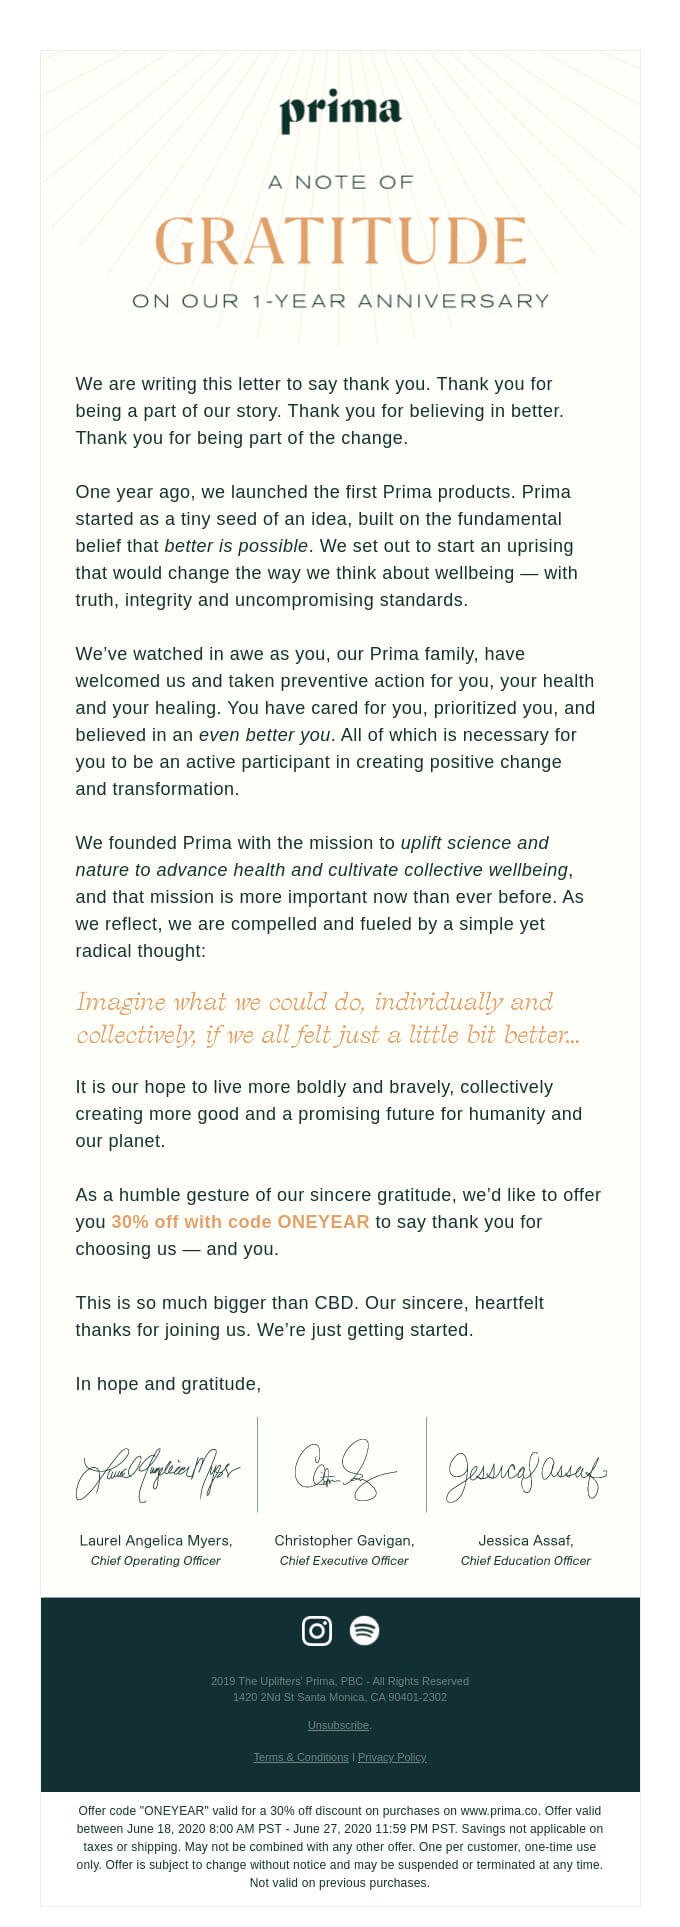 prima thank you email example